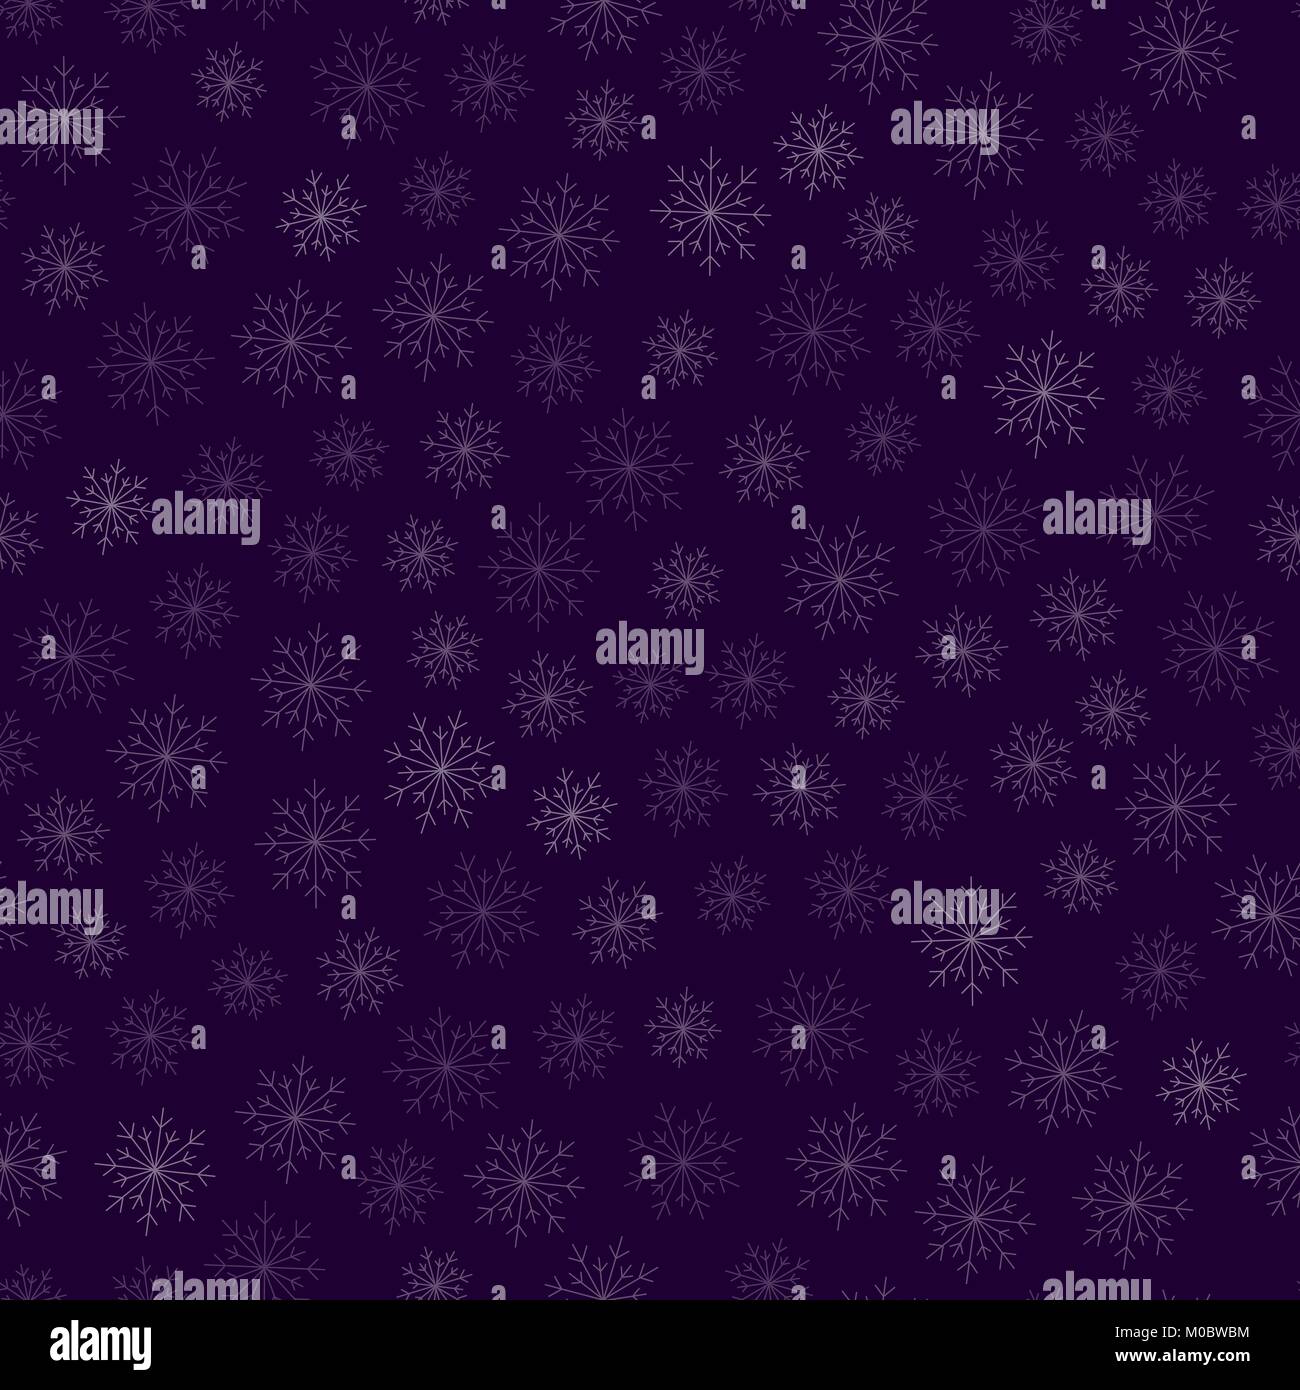 Seamless Pattern: White Snowflakes on Violet Background Stock Vector